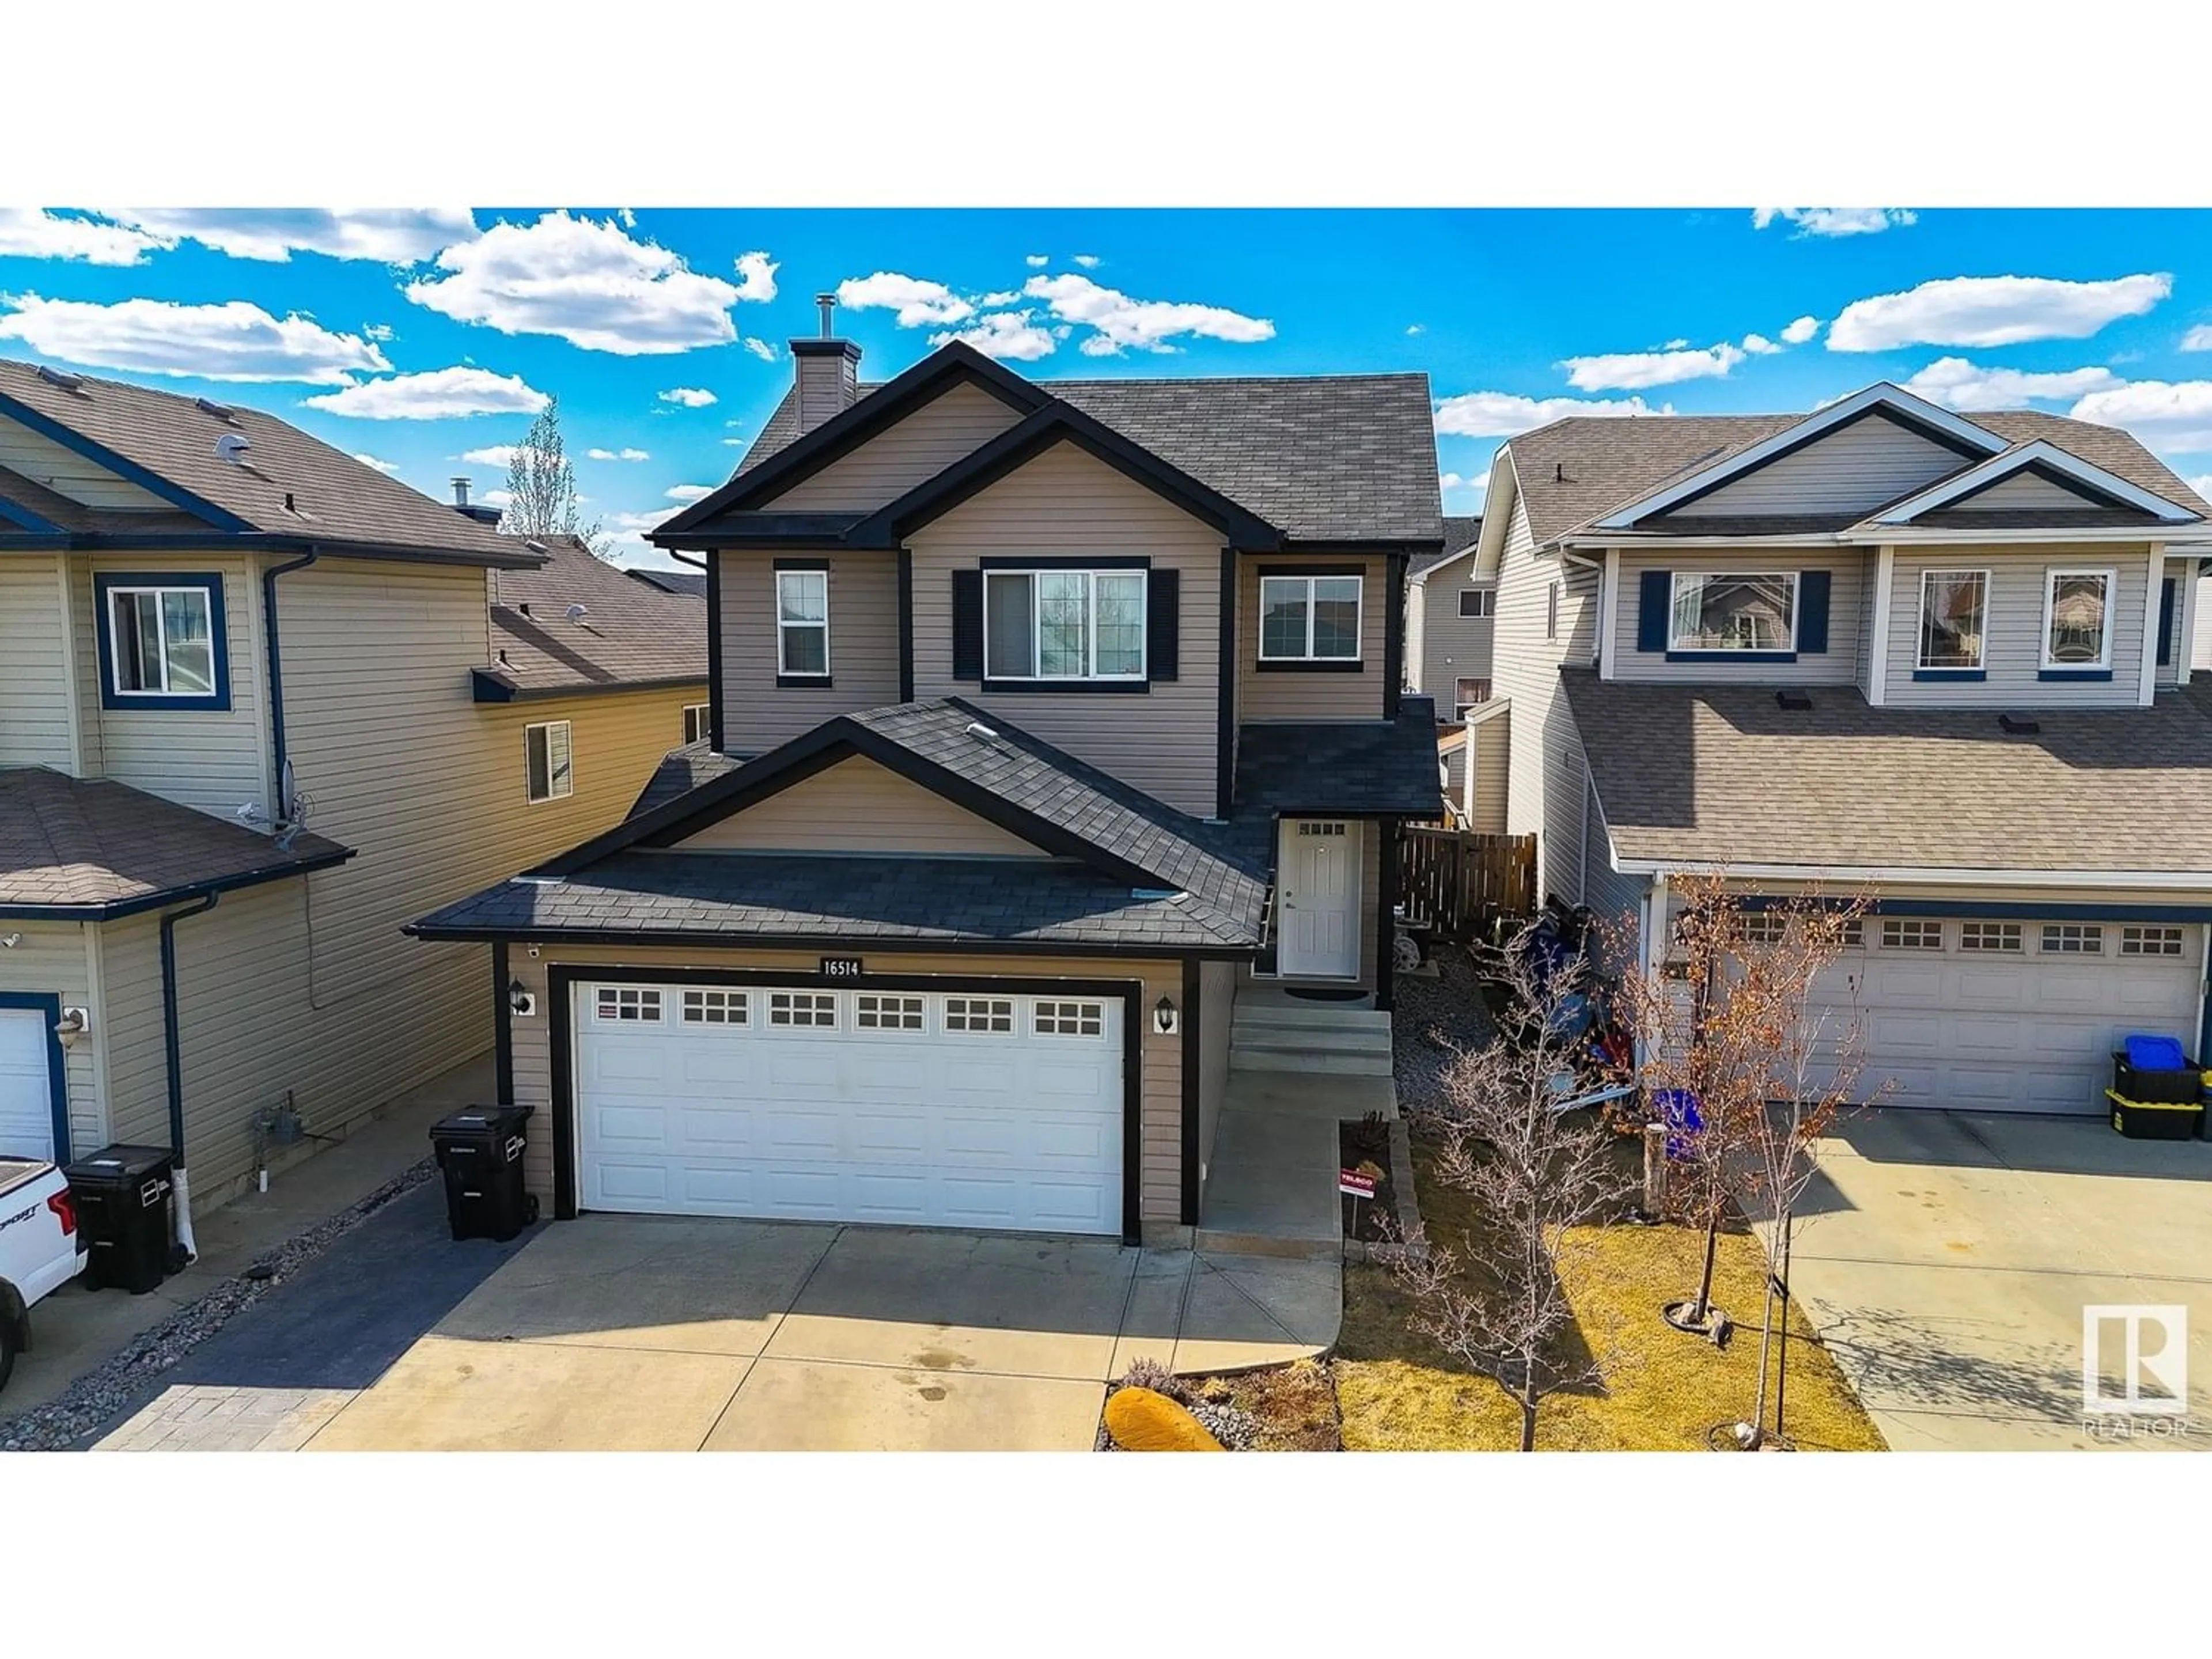 Frontside or backside of a home for 16514 57 ST NW, Edmonton Alberta T5Y0A2